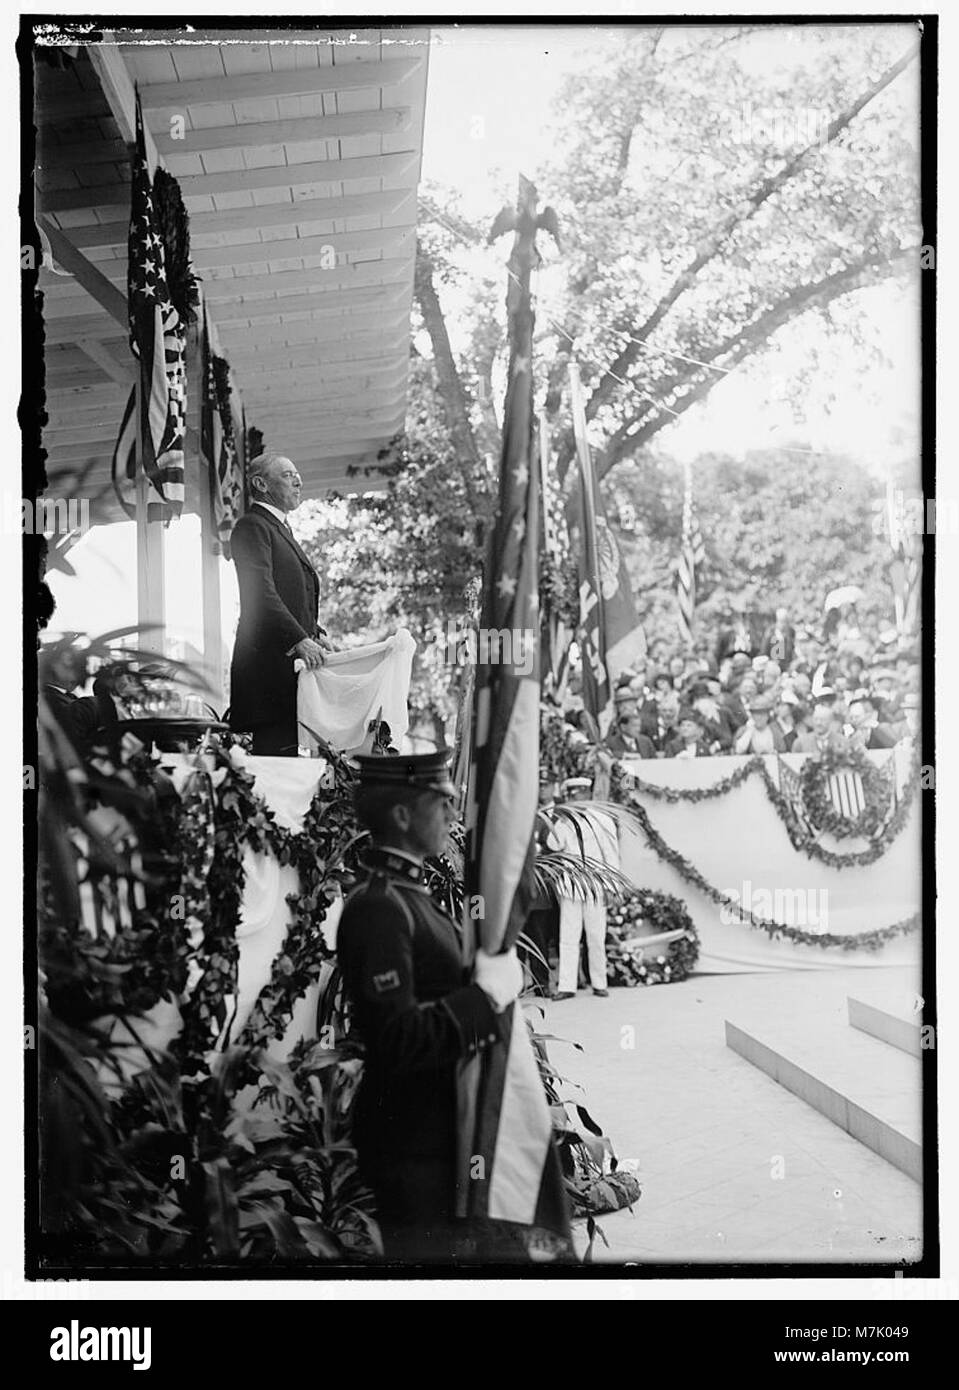 BARRY, JOHN. COMMODORE, U.S.N. HIS STATUE UNVEILED, MAY 16, 1914. PRESIDENT WILSON SPEAKING LCCN2016865560 Stock Photo